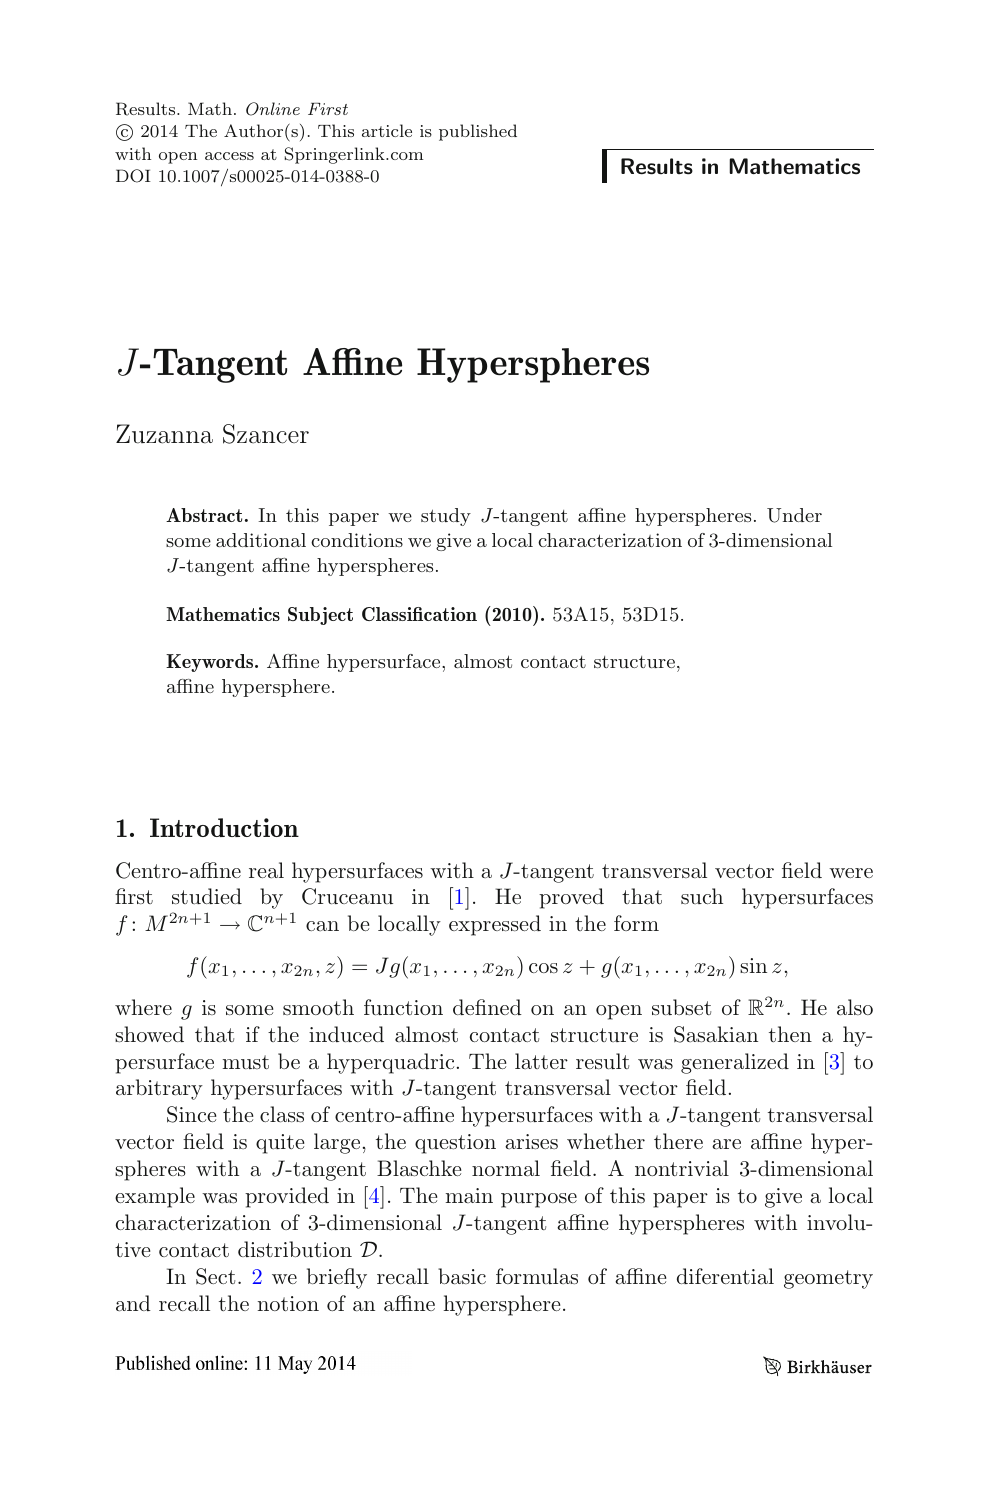 J Tangent Affine Hyperspheres Topic Of Research Paper In Mathematics Download Scholarly Article Pdf And Read For Free On Cyberleninka Open Science Hub